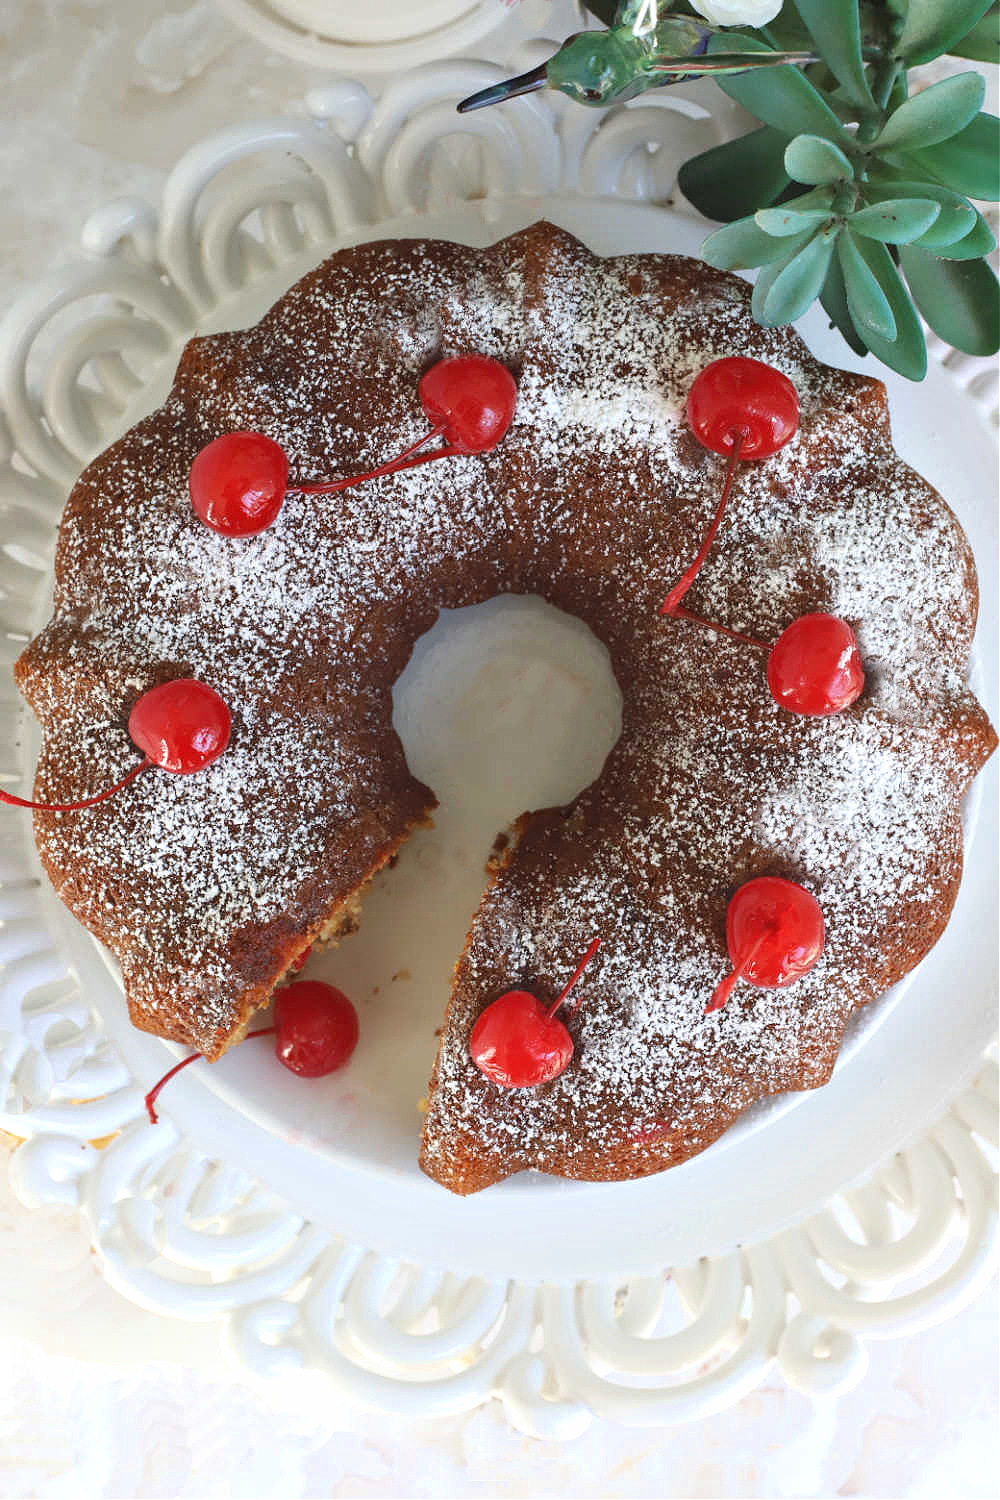 This Hummingbird cake is an easy recipe Bundt cake with pineapple, bananas, cherries, pecans and cinnamon beginning with a box mix. 